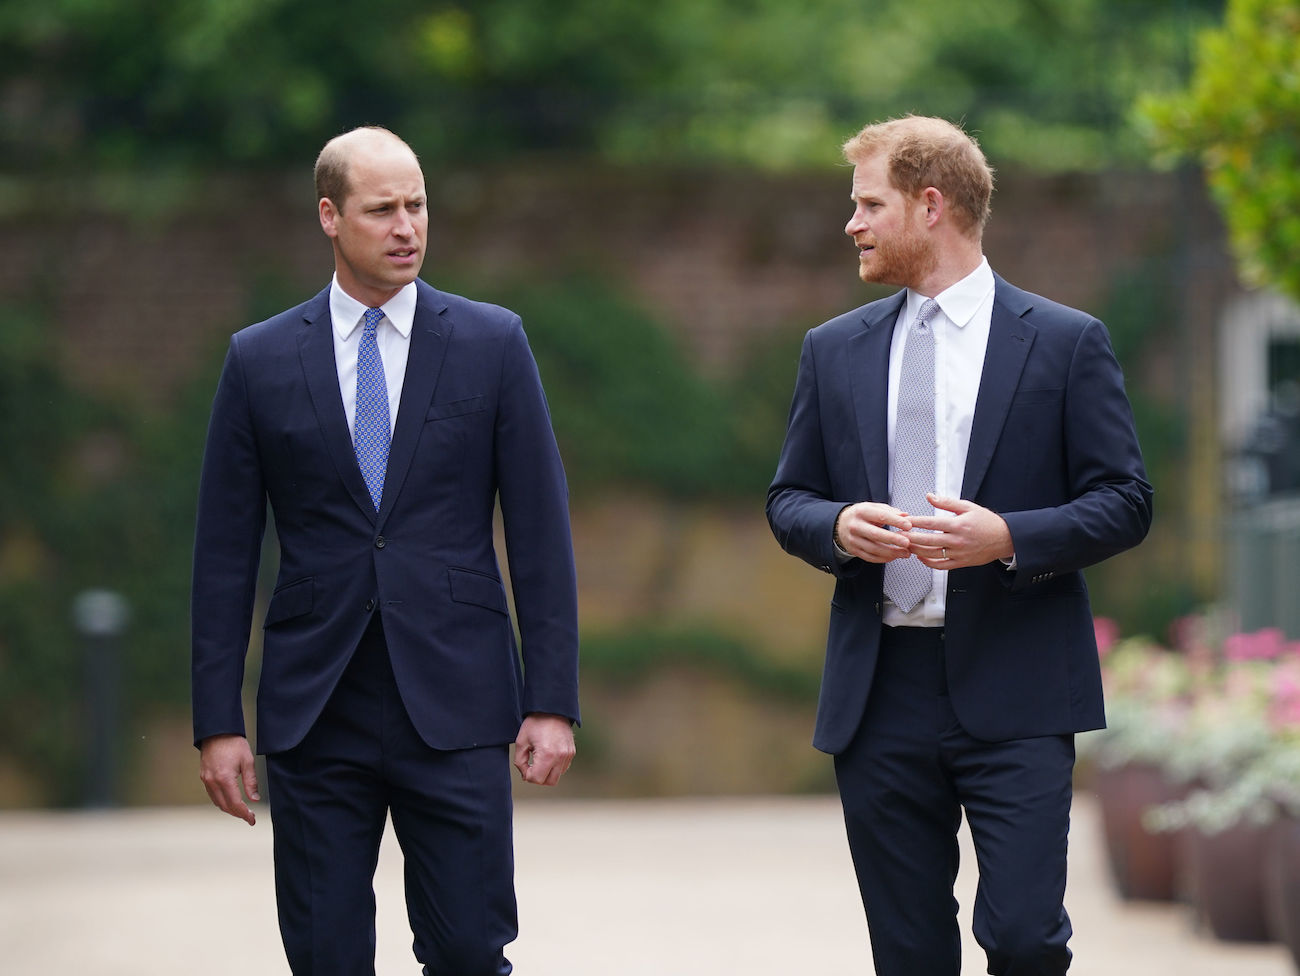 Prince William and Prince Harry wearing suits and walking next to each other